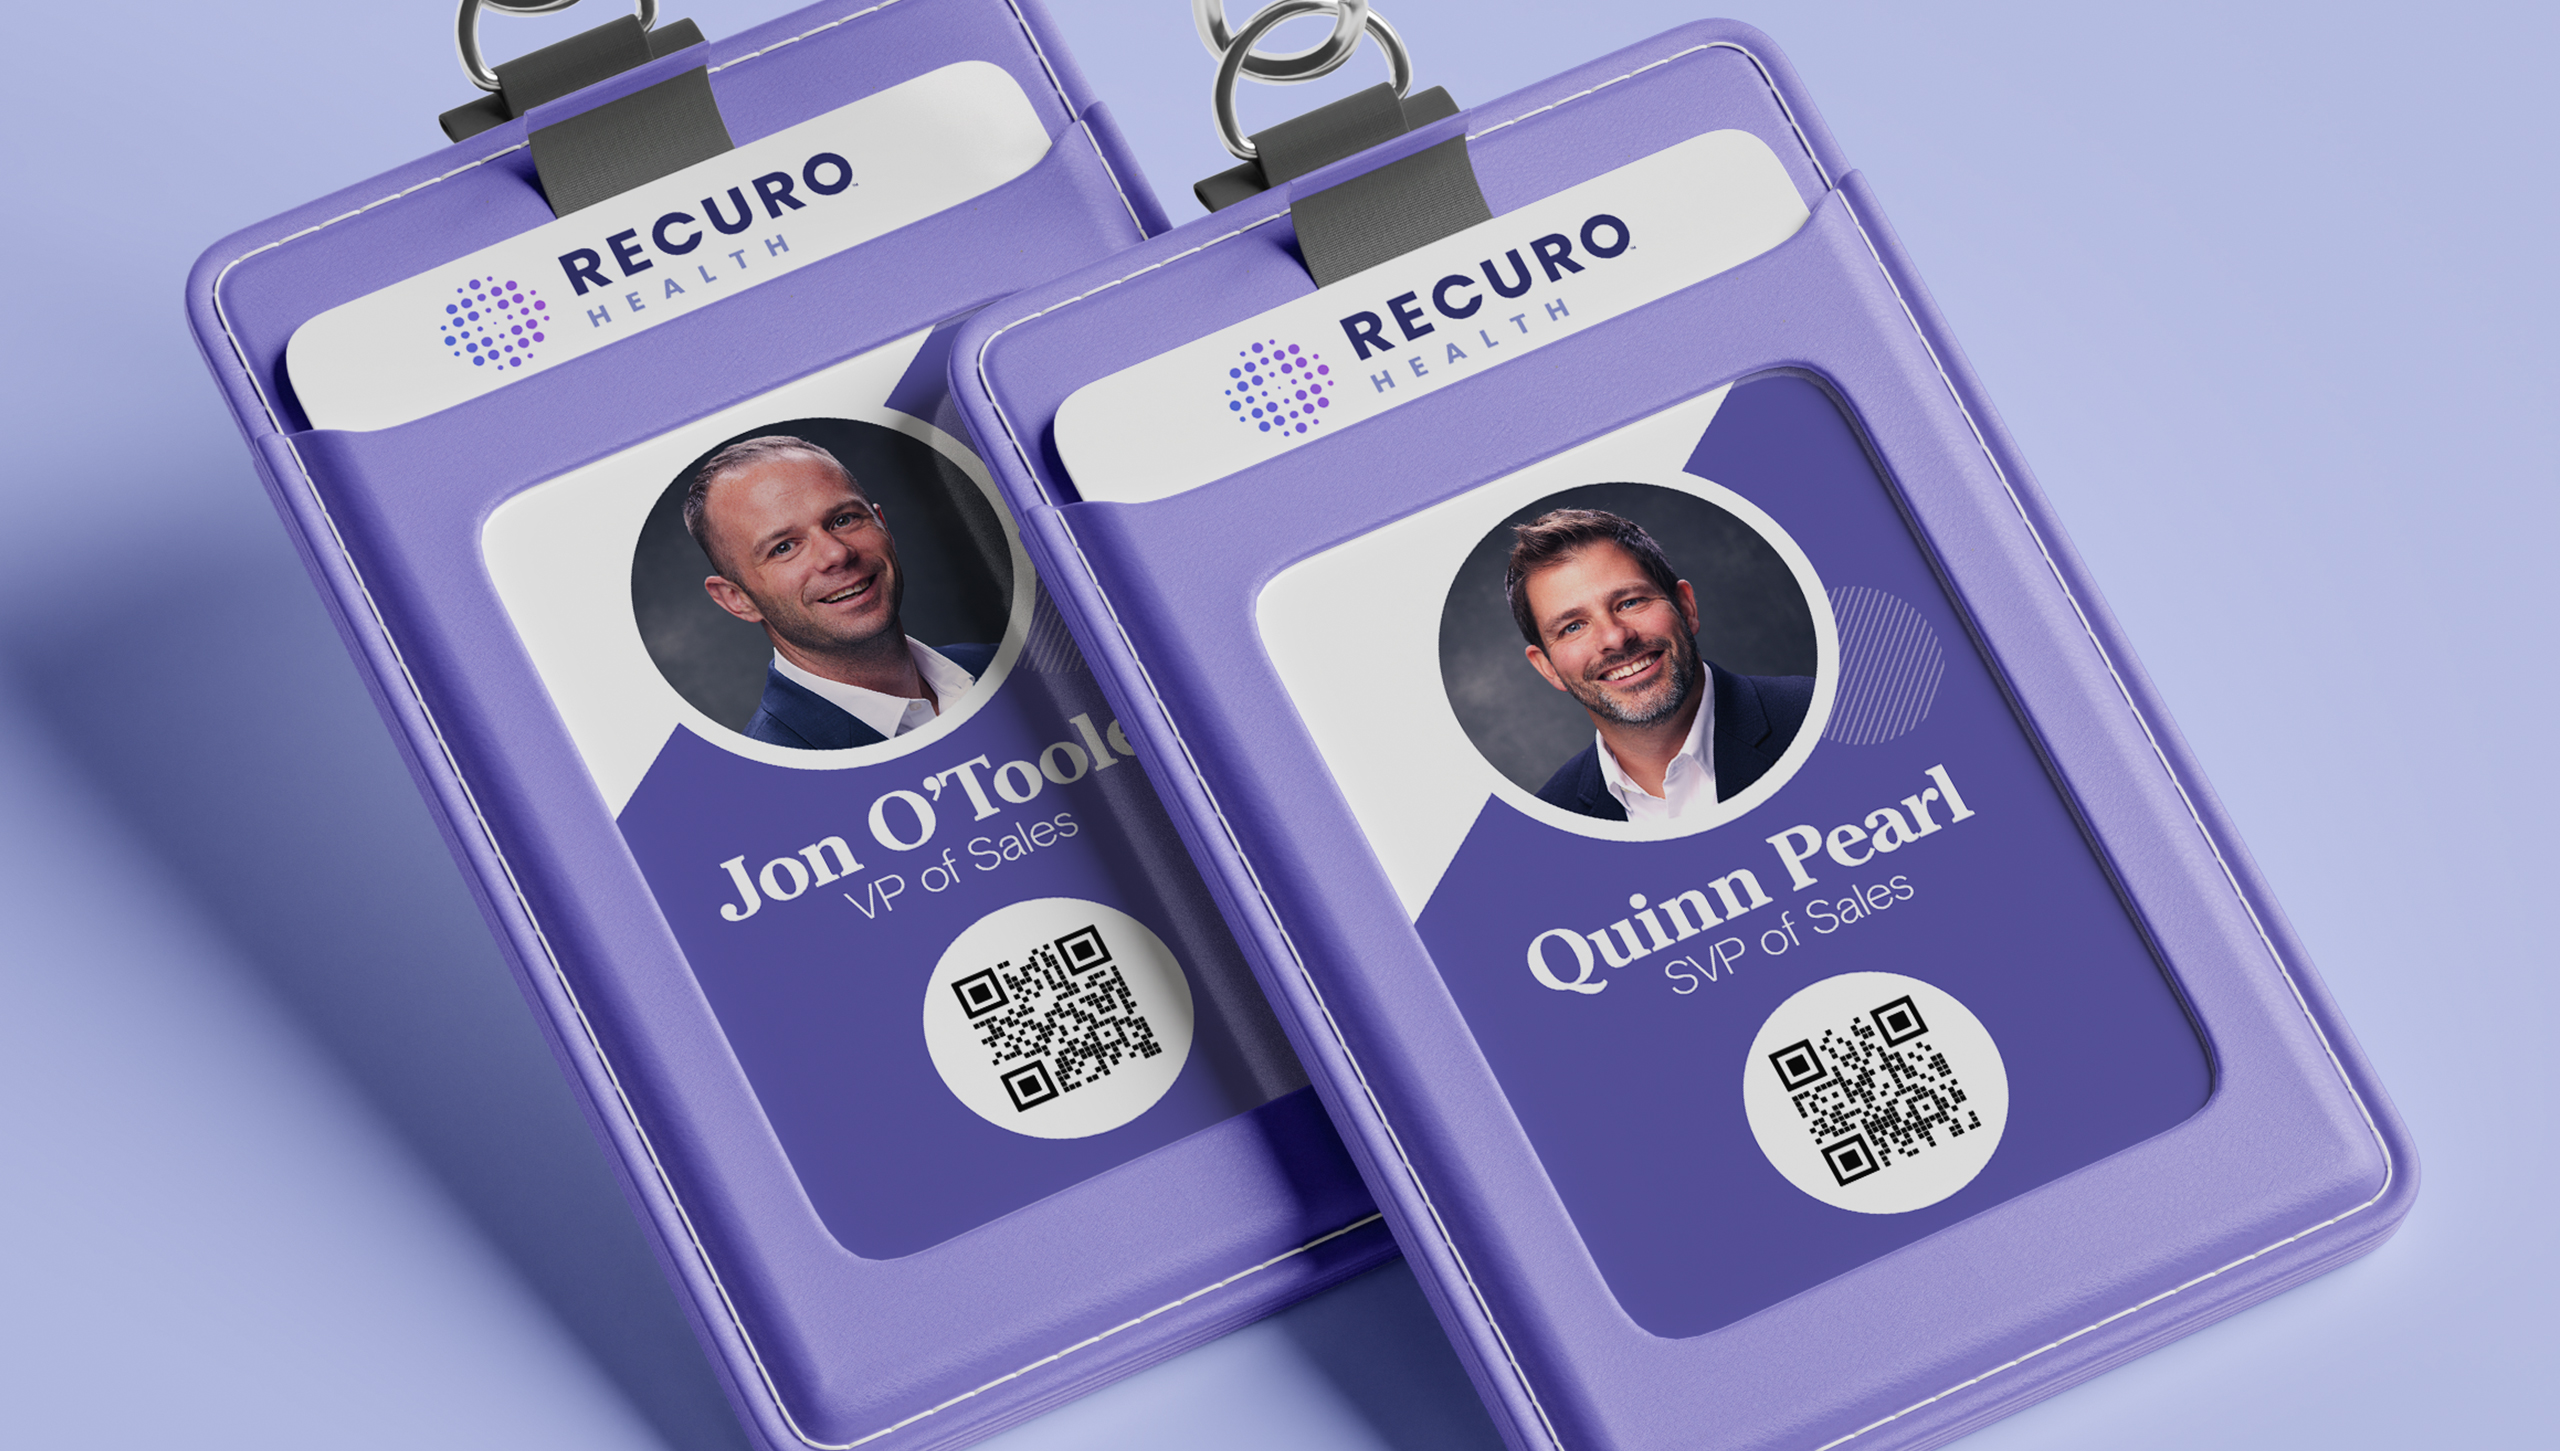 Meet with Recuro Leaders at YOU Powered Symposium